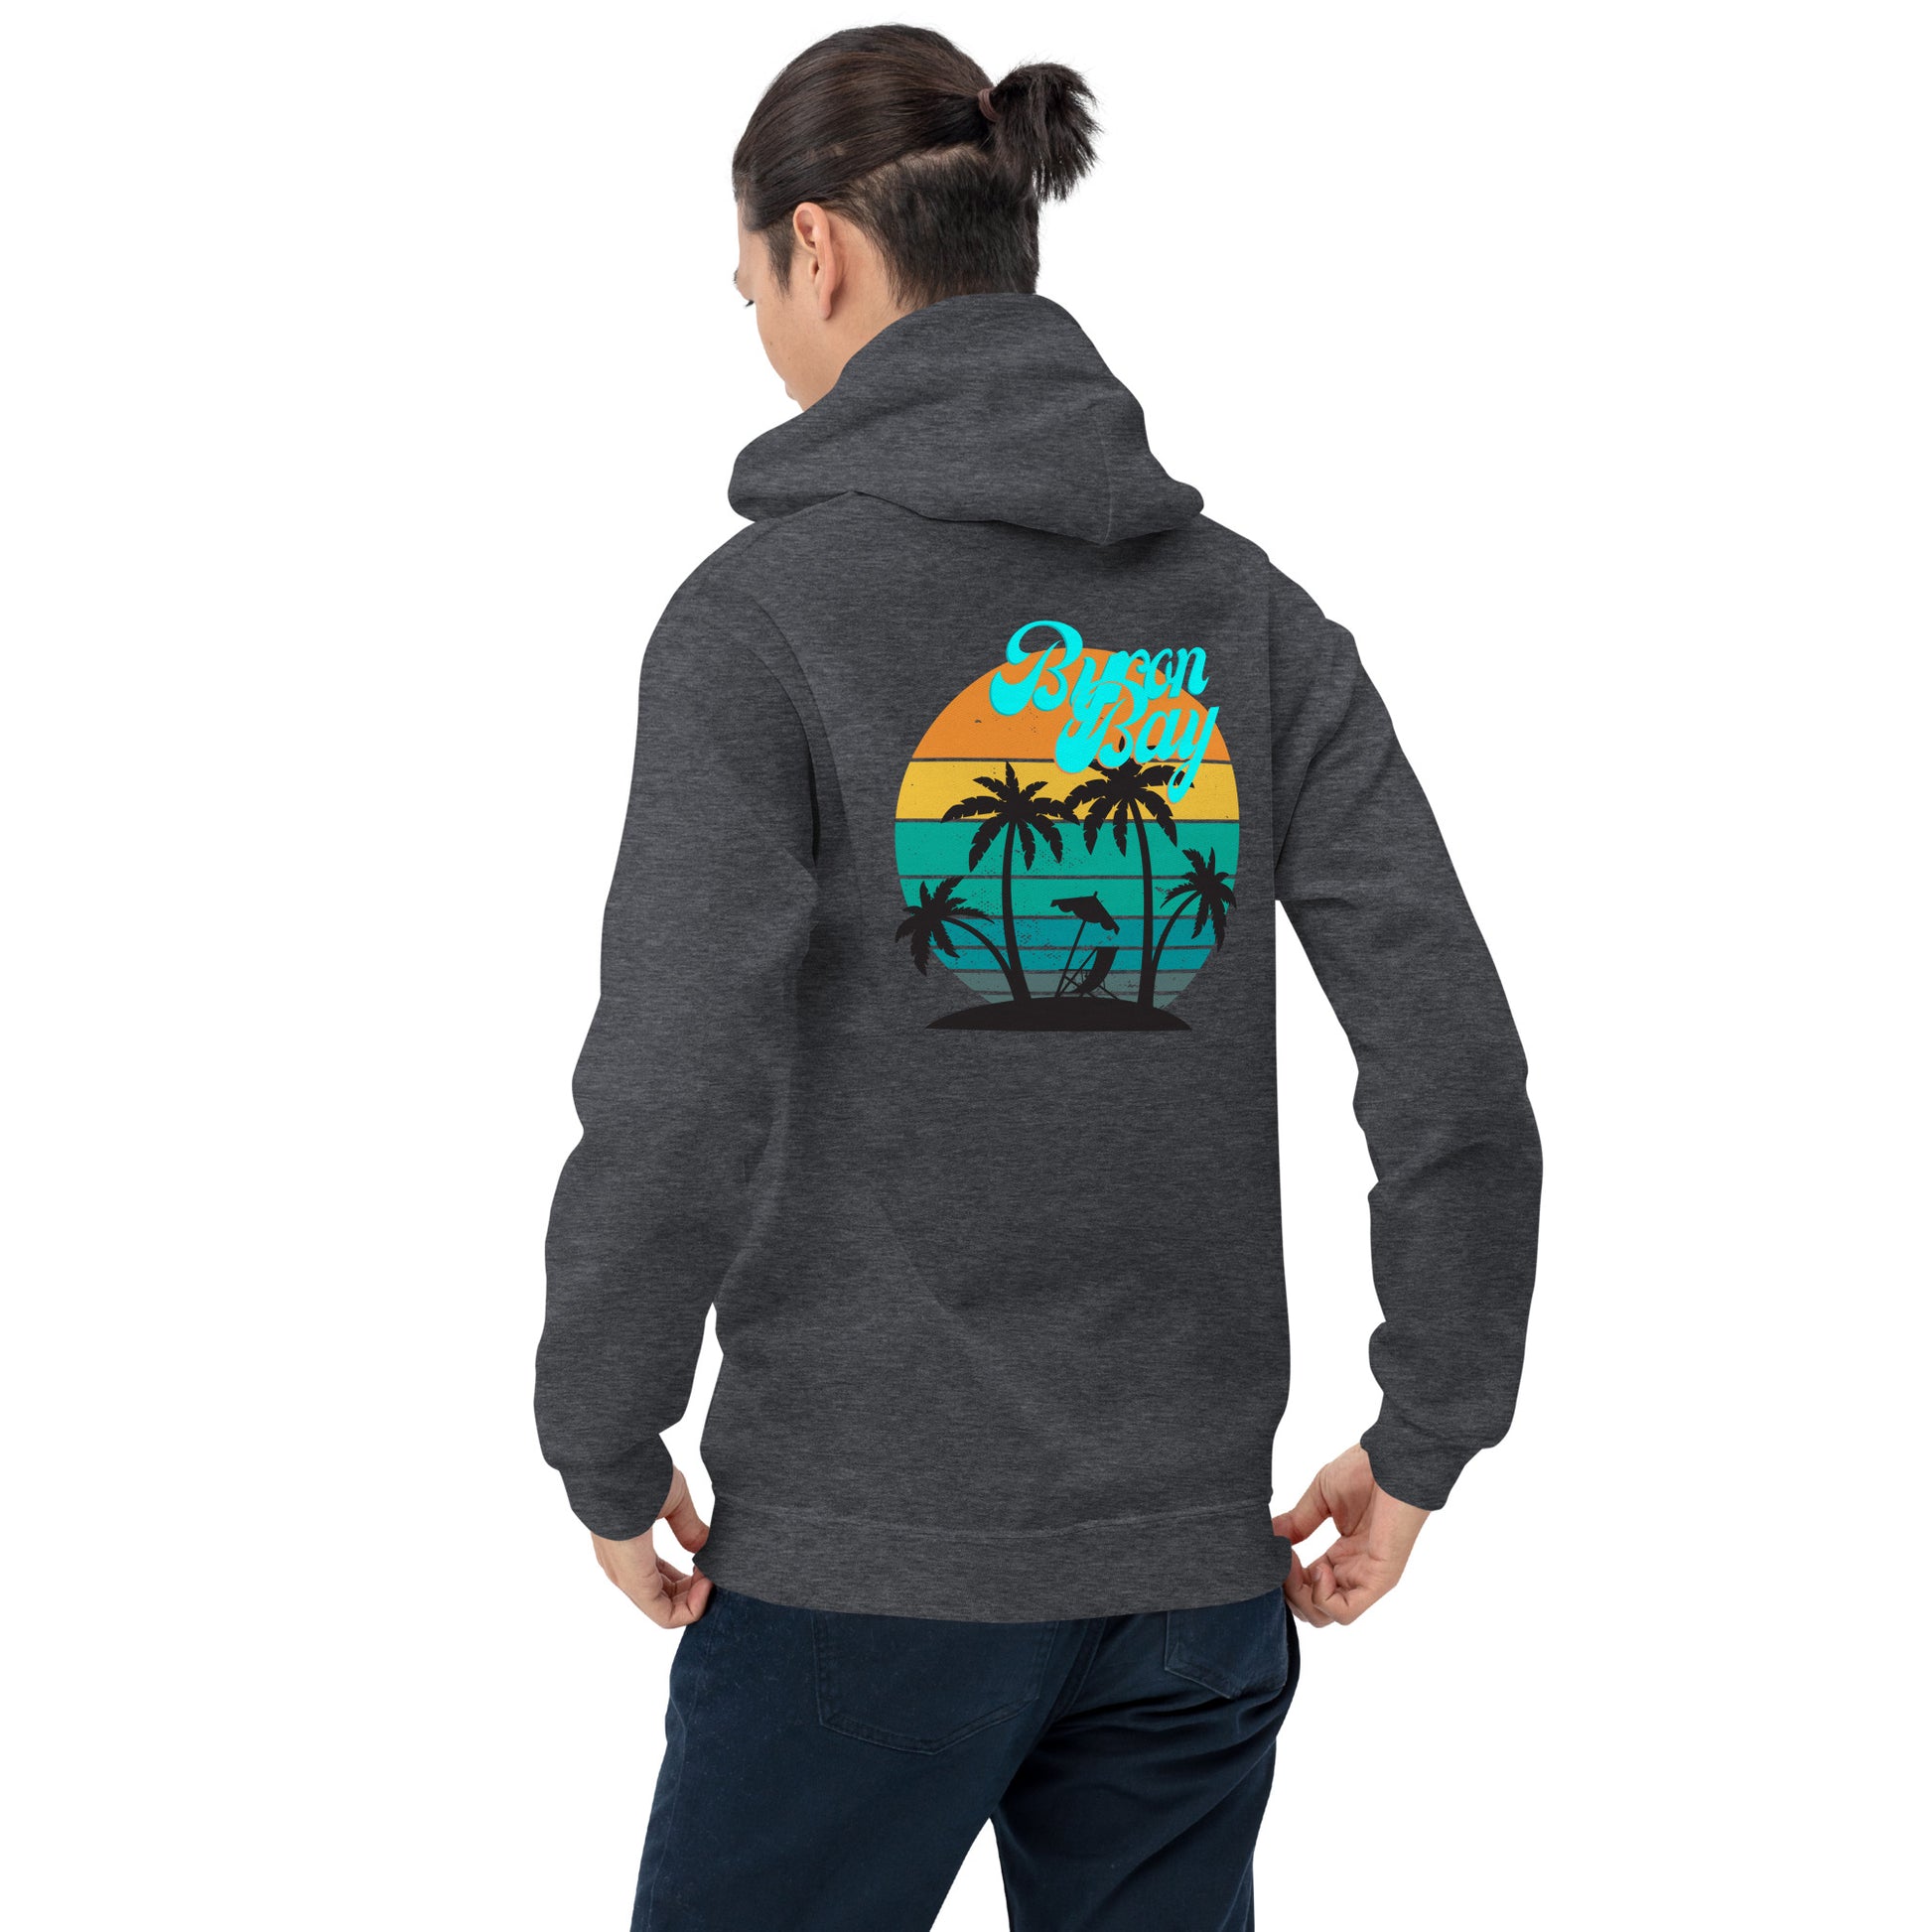  Unisex Hoodie - Dark Heather/Grey - Back view being warn by woman with her hands holding the bottom of the hoodie - Byron Bay design on back, plain front with pouch pocket - Genuine Byron Bay Merchandise | Produced by Go Sea Kayak Byron Bay 